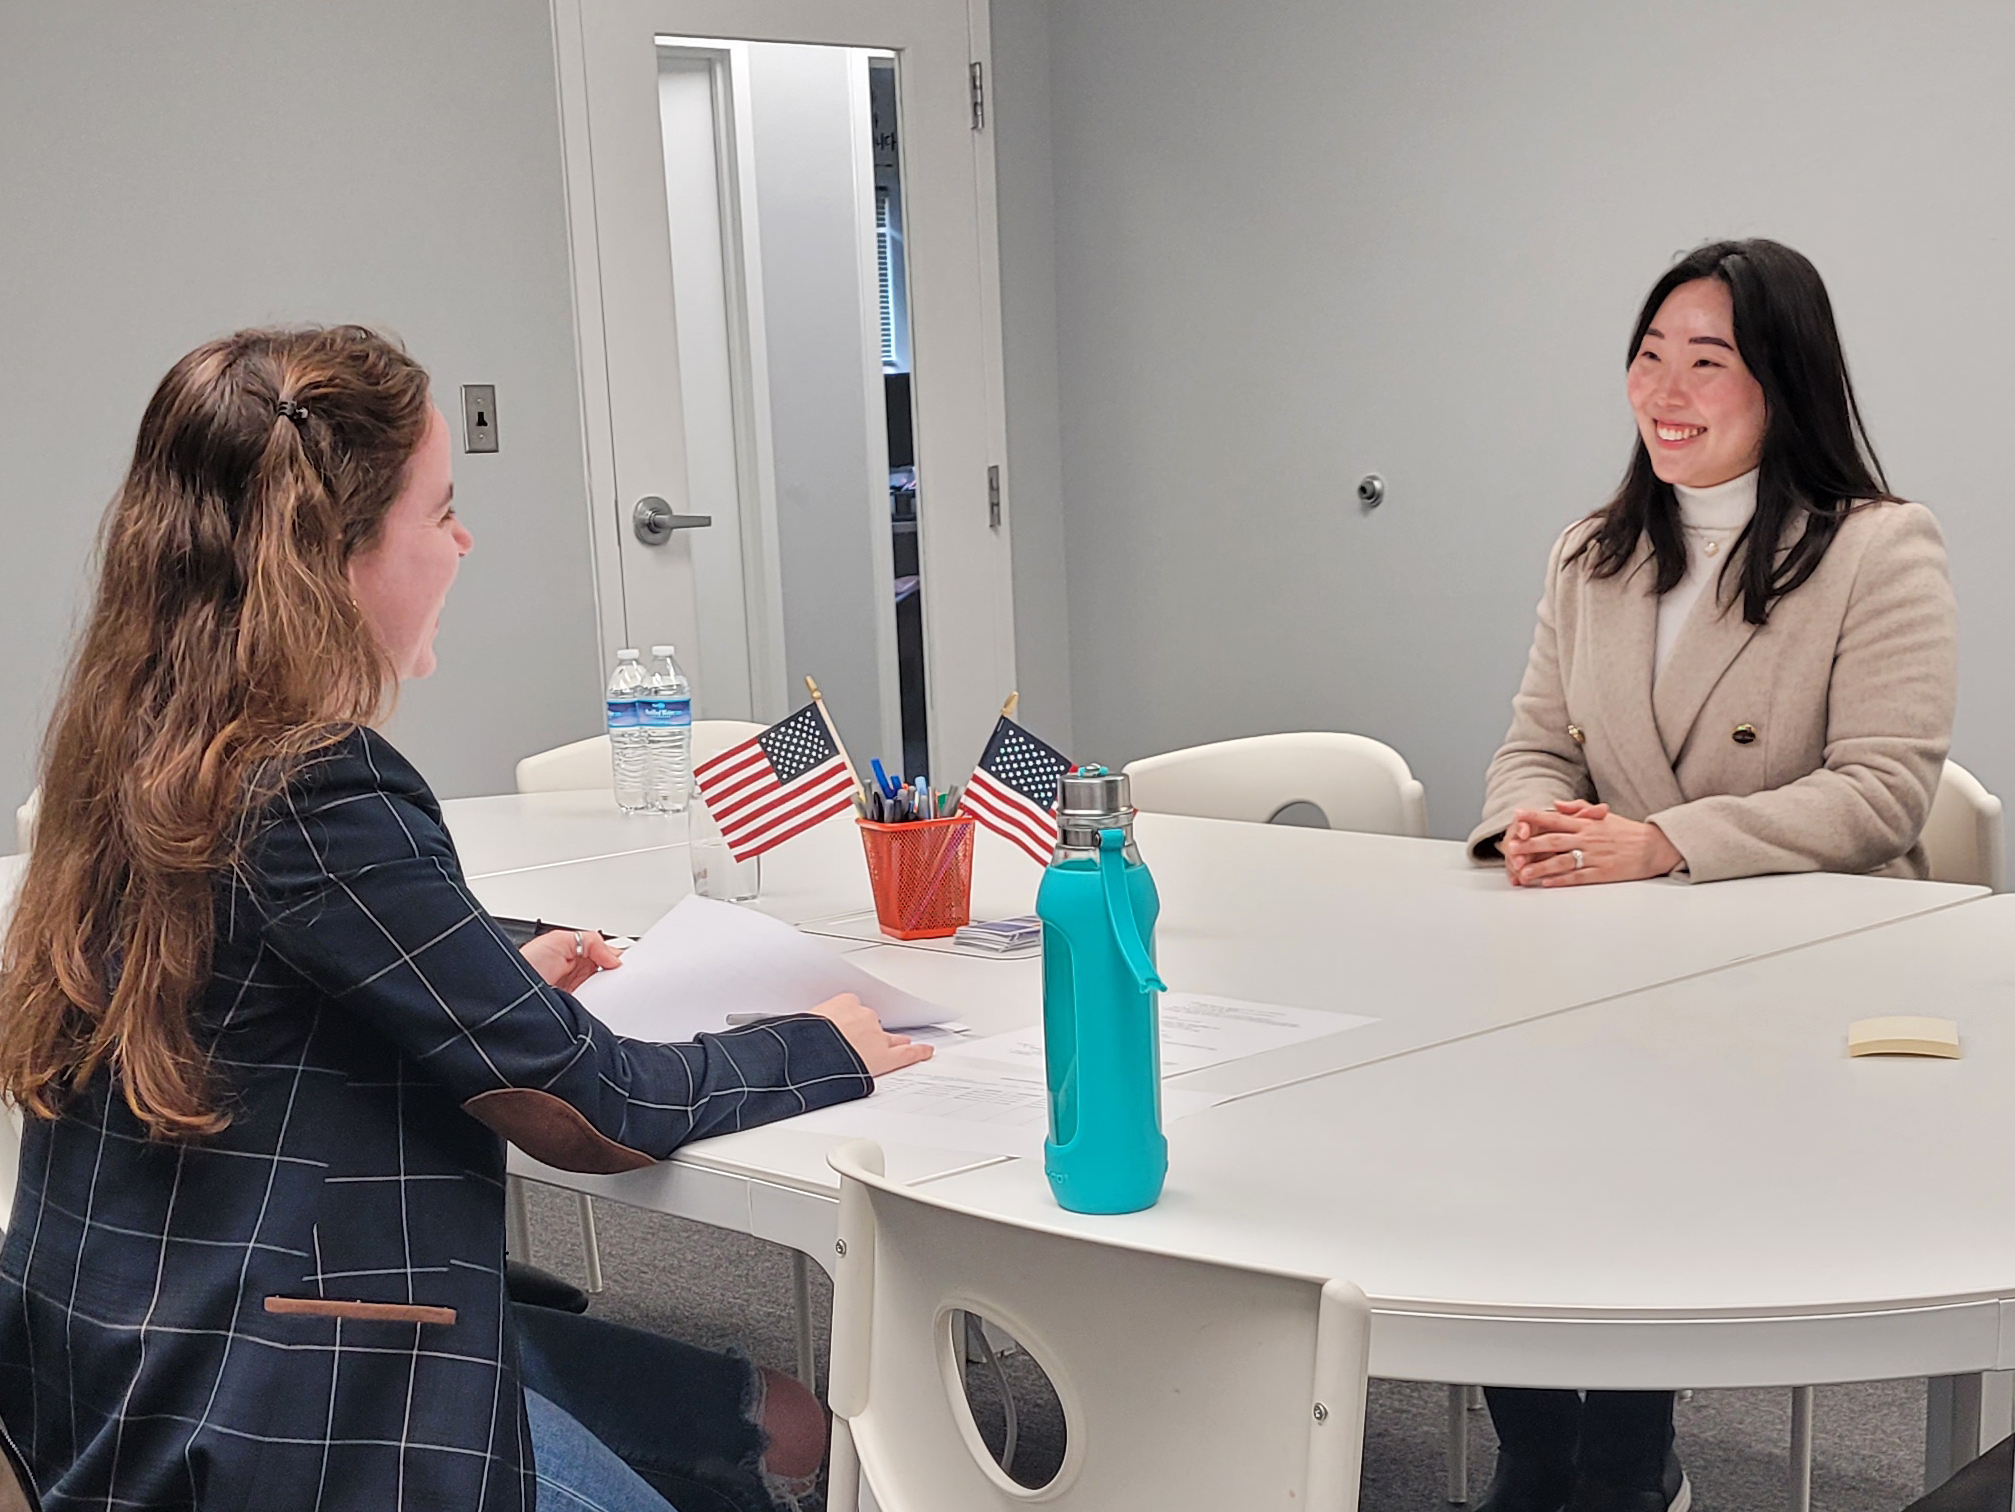 A person interviews another person at a white table, with 2 small US flags sticking out from a pencil holder.